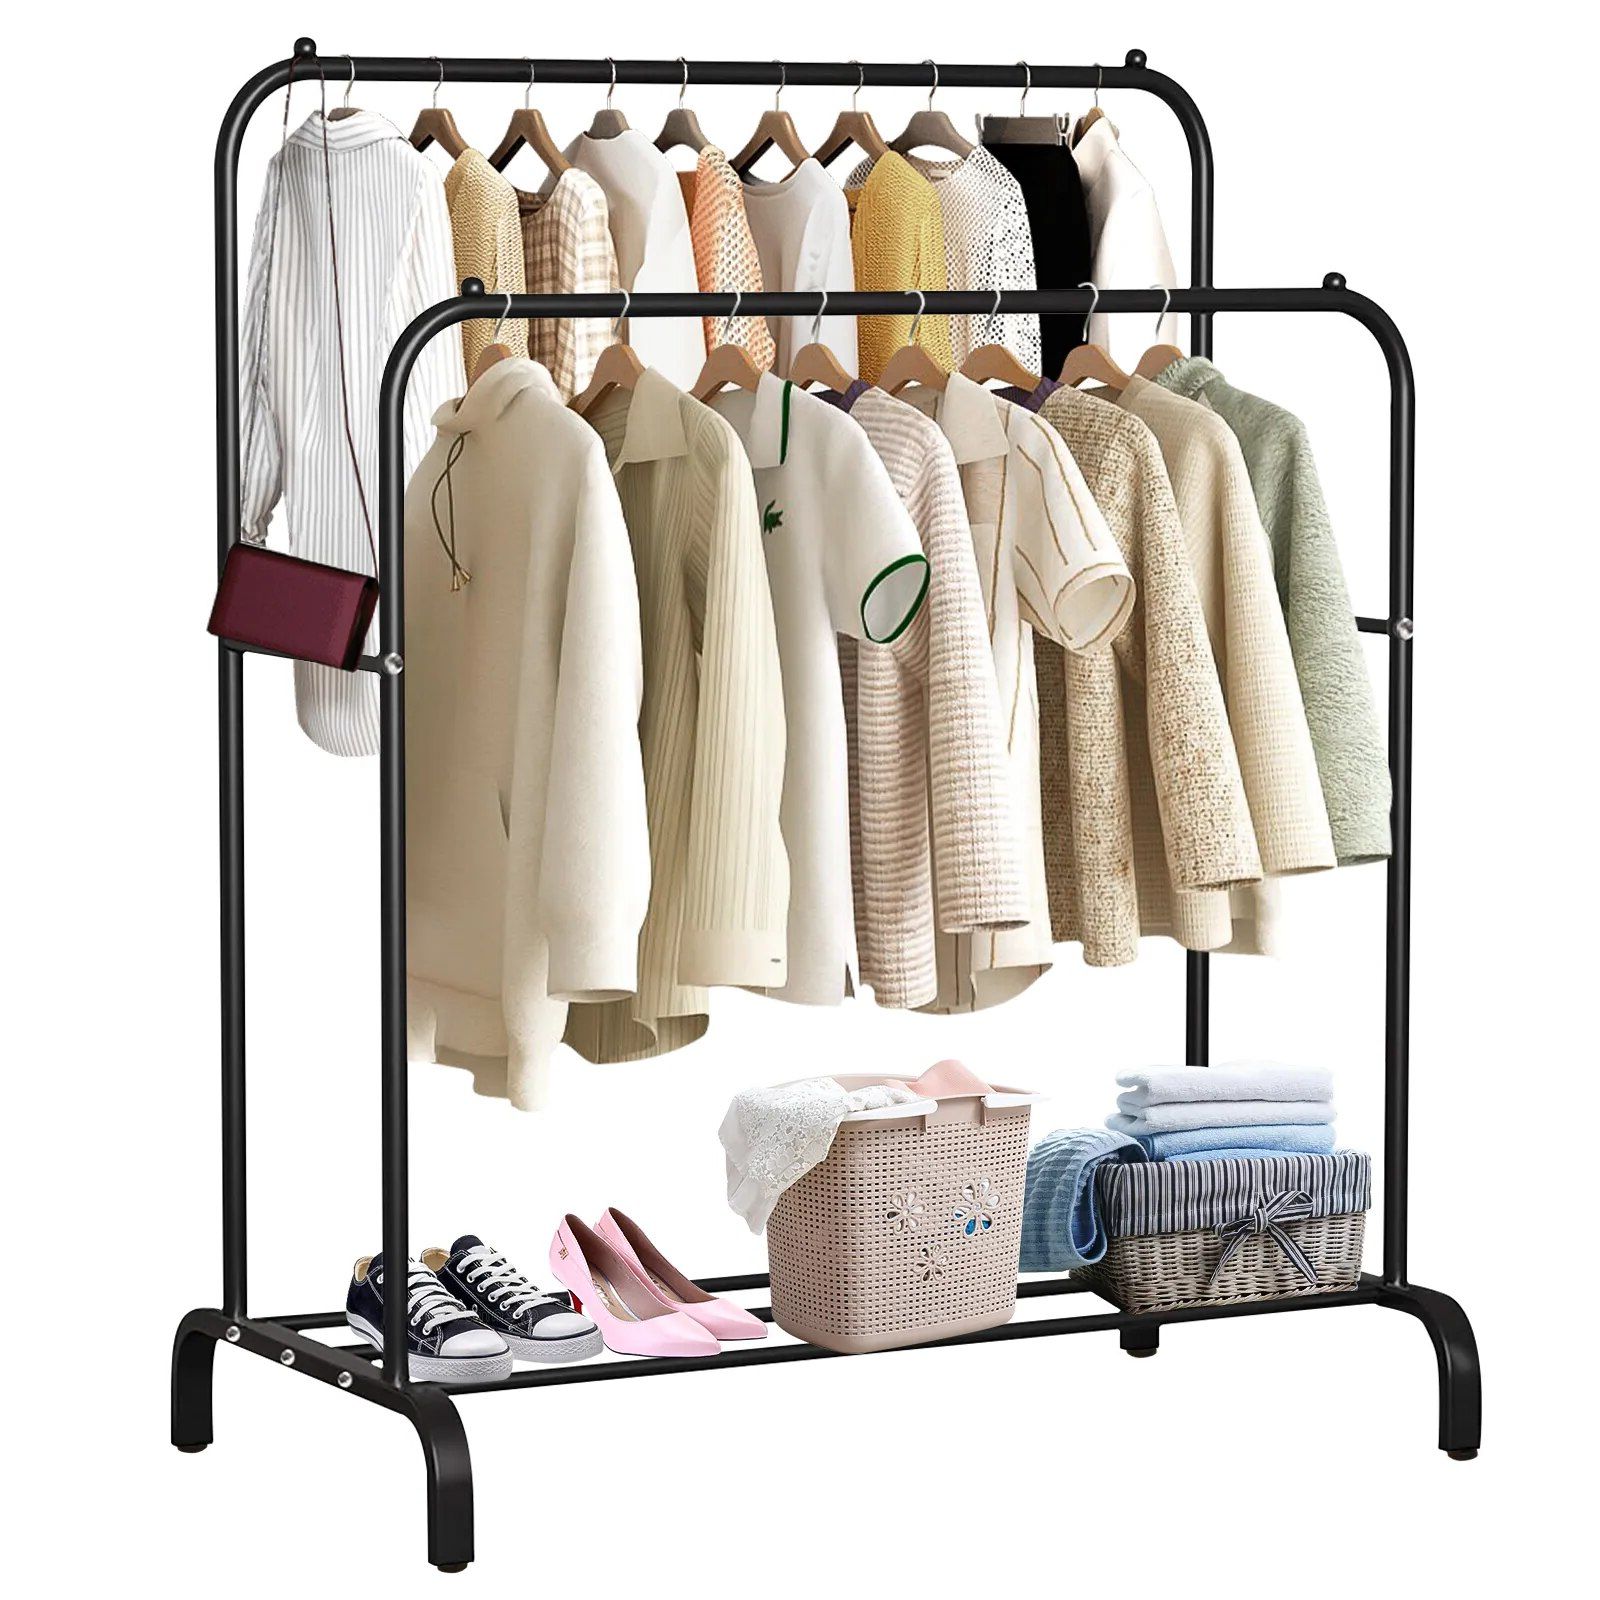 Voilamart Double Hanging Rails For Clothes Heavy Duty Garment Rail Free  Standing Metal Clothing Rack Commercial Coat Rail – Drying Racks –  Aliexpress With Regard To Double Hanging Rail Wardrobes (Gallery 11 of 20)